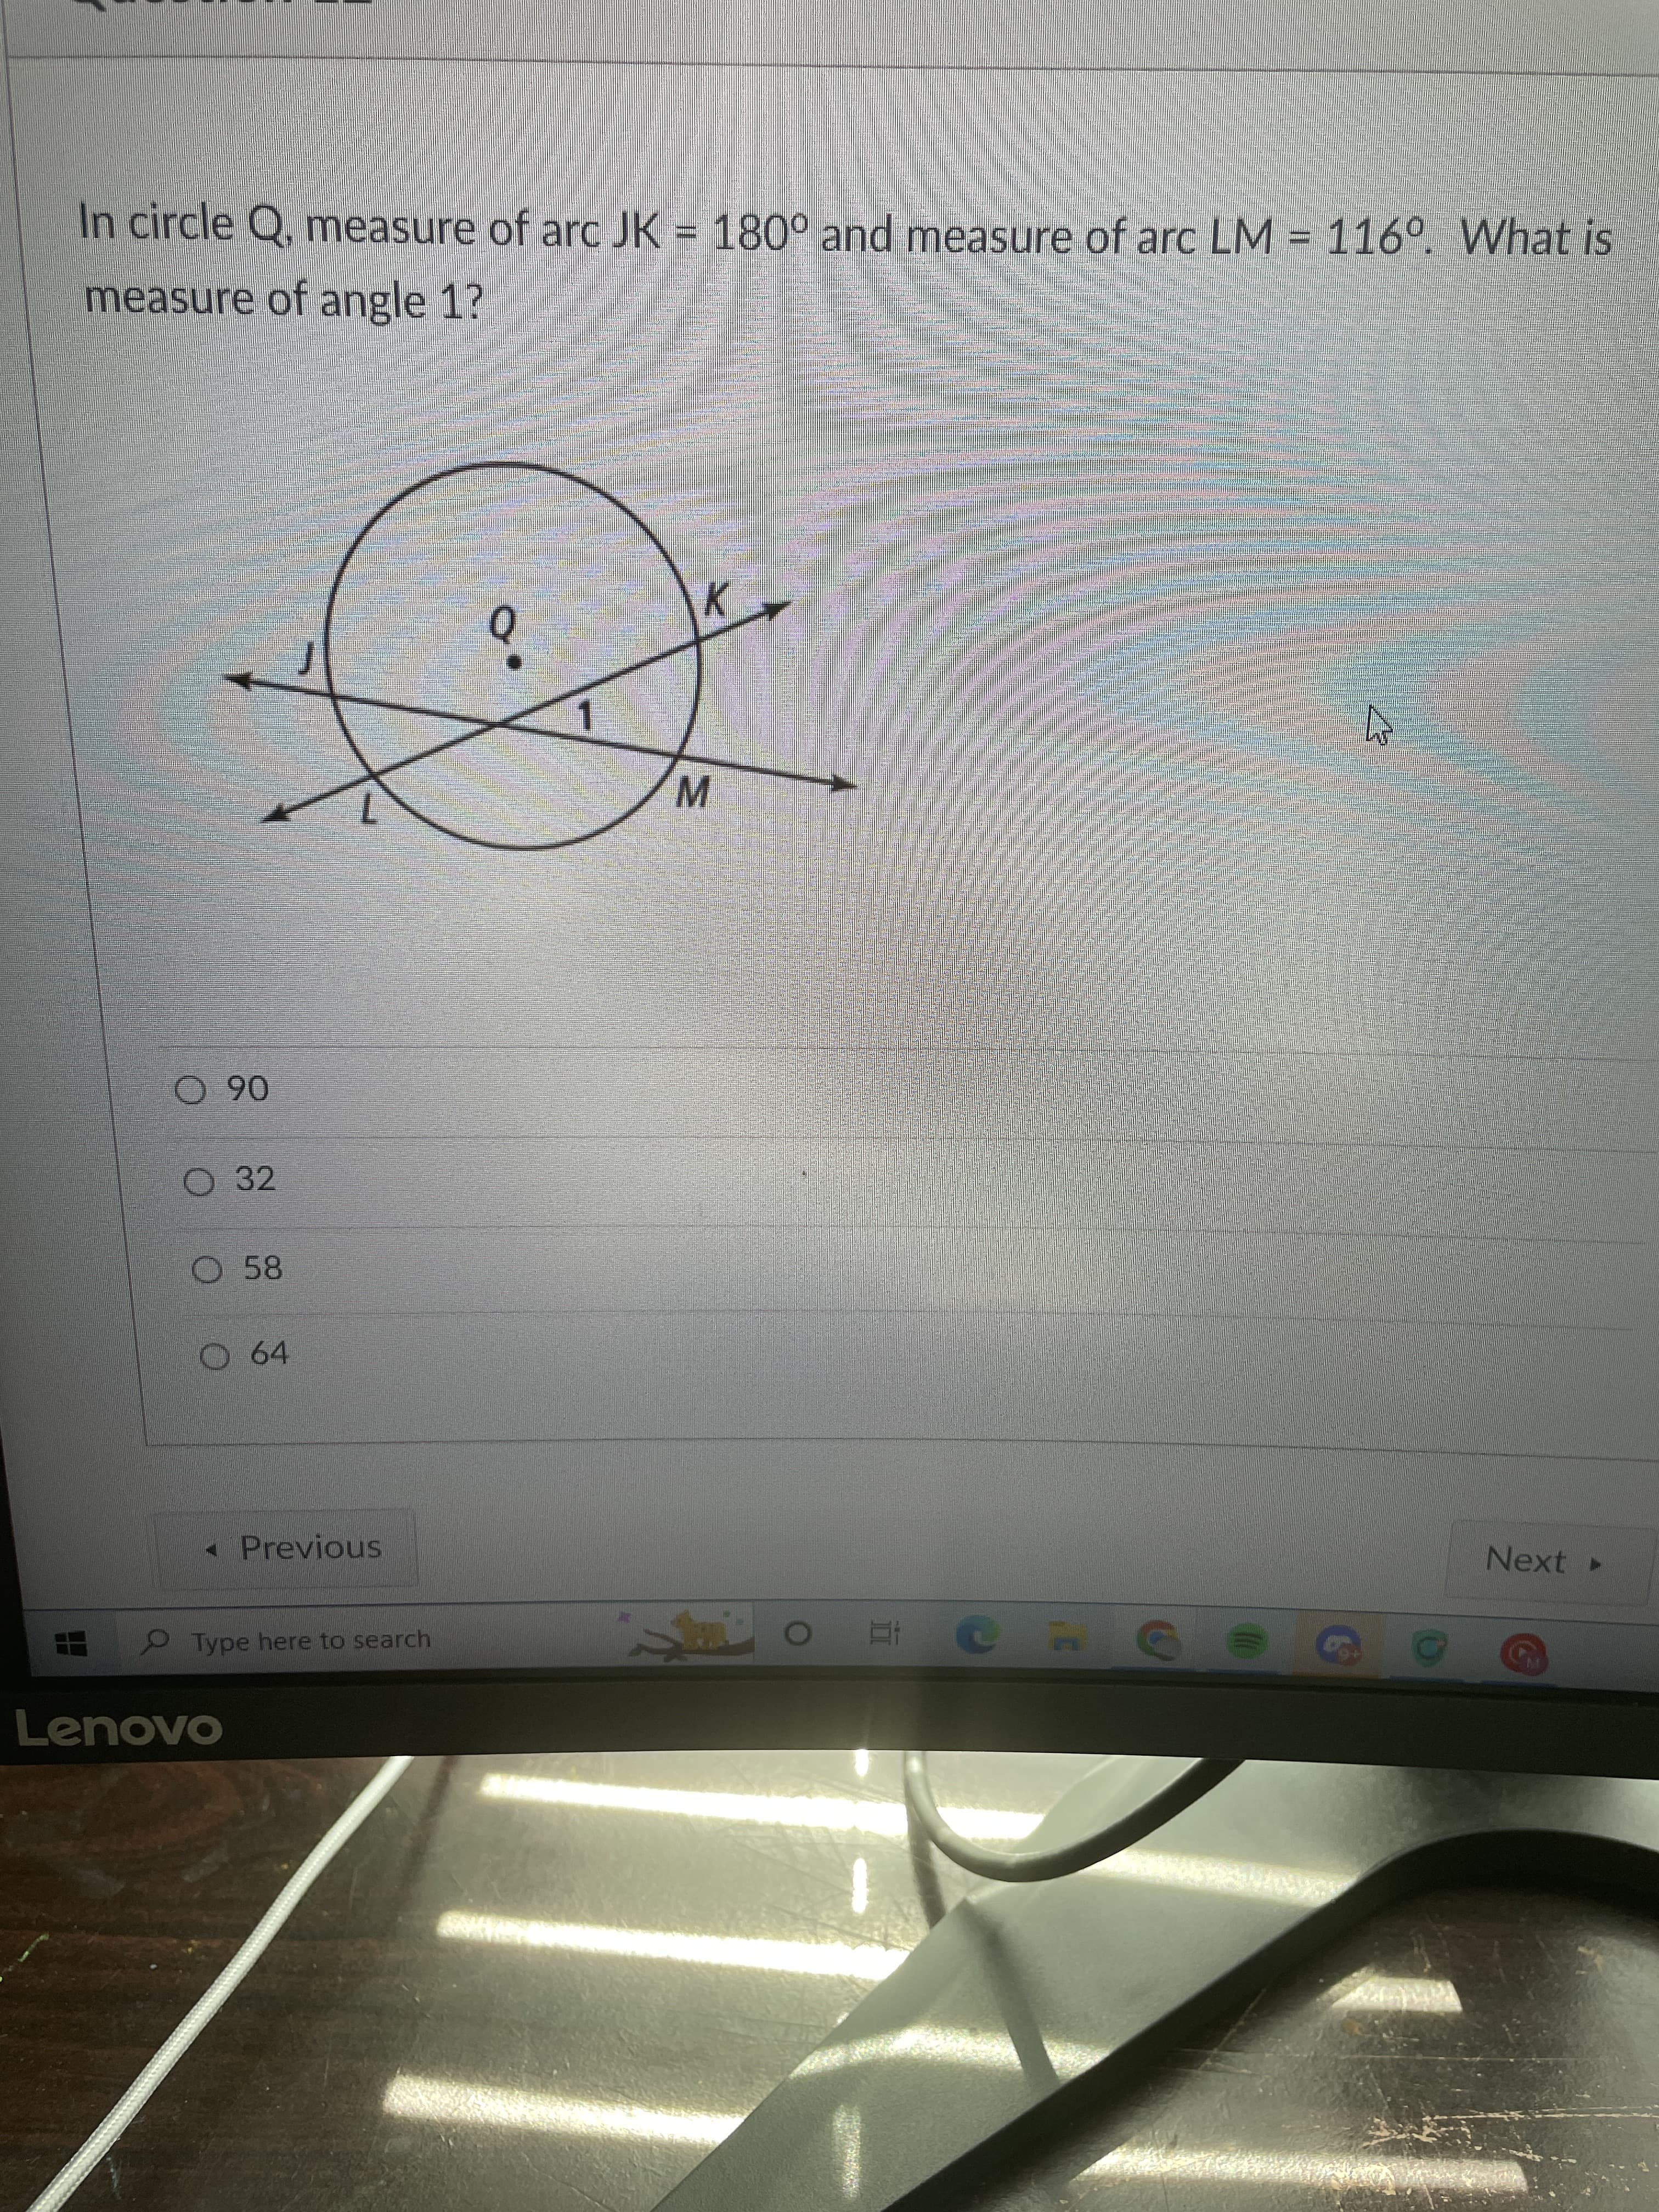 In circle Q, measure of arc JK = 180° and measure of arc LM = 116°. What is
measure of angle 1?
06 O
O 58
- Previous
Next
Type here to search
五
